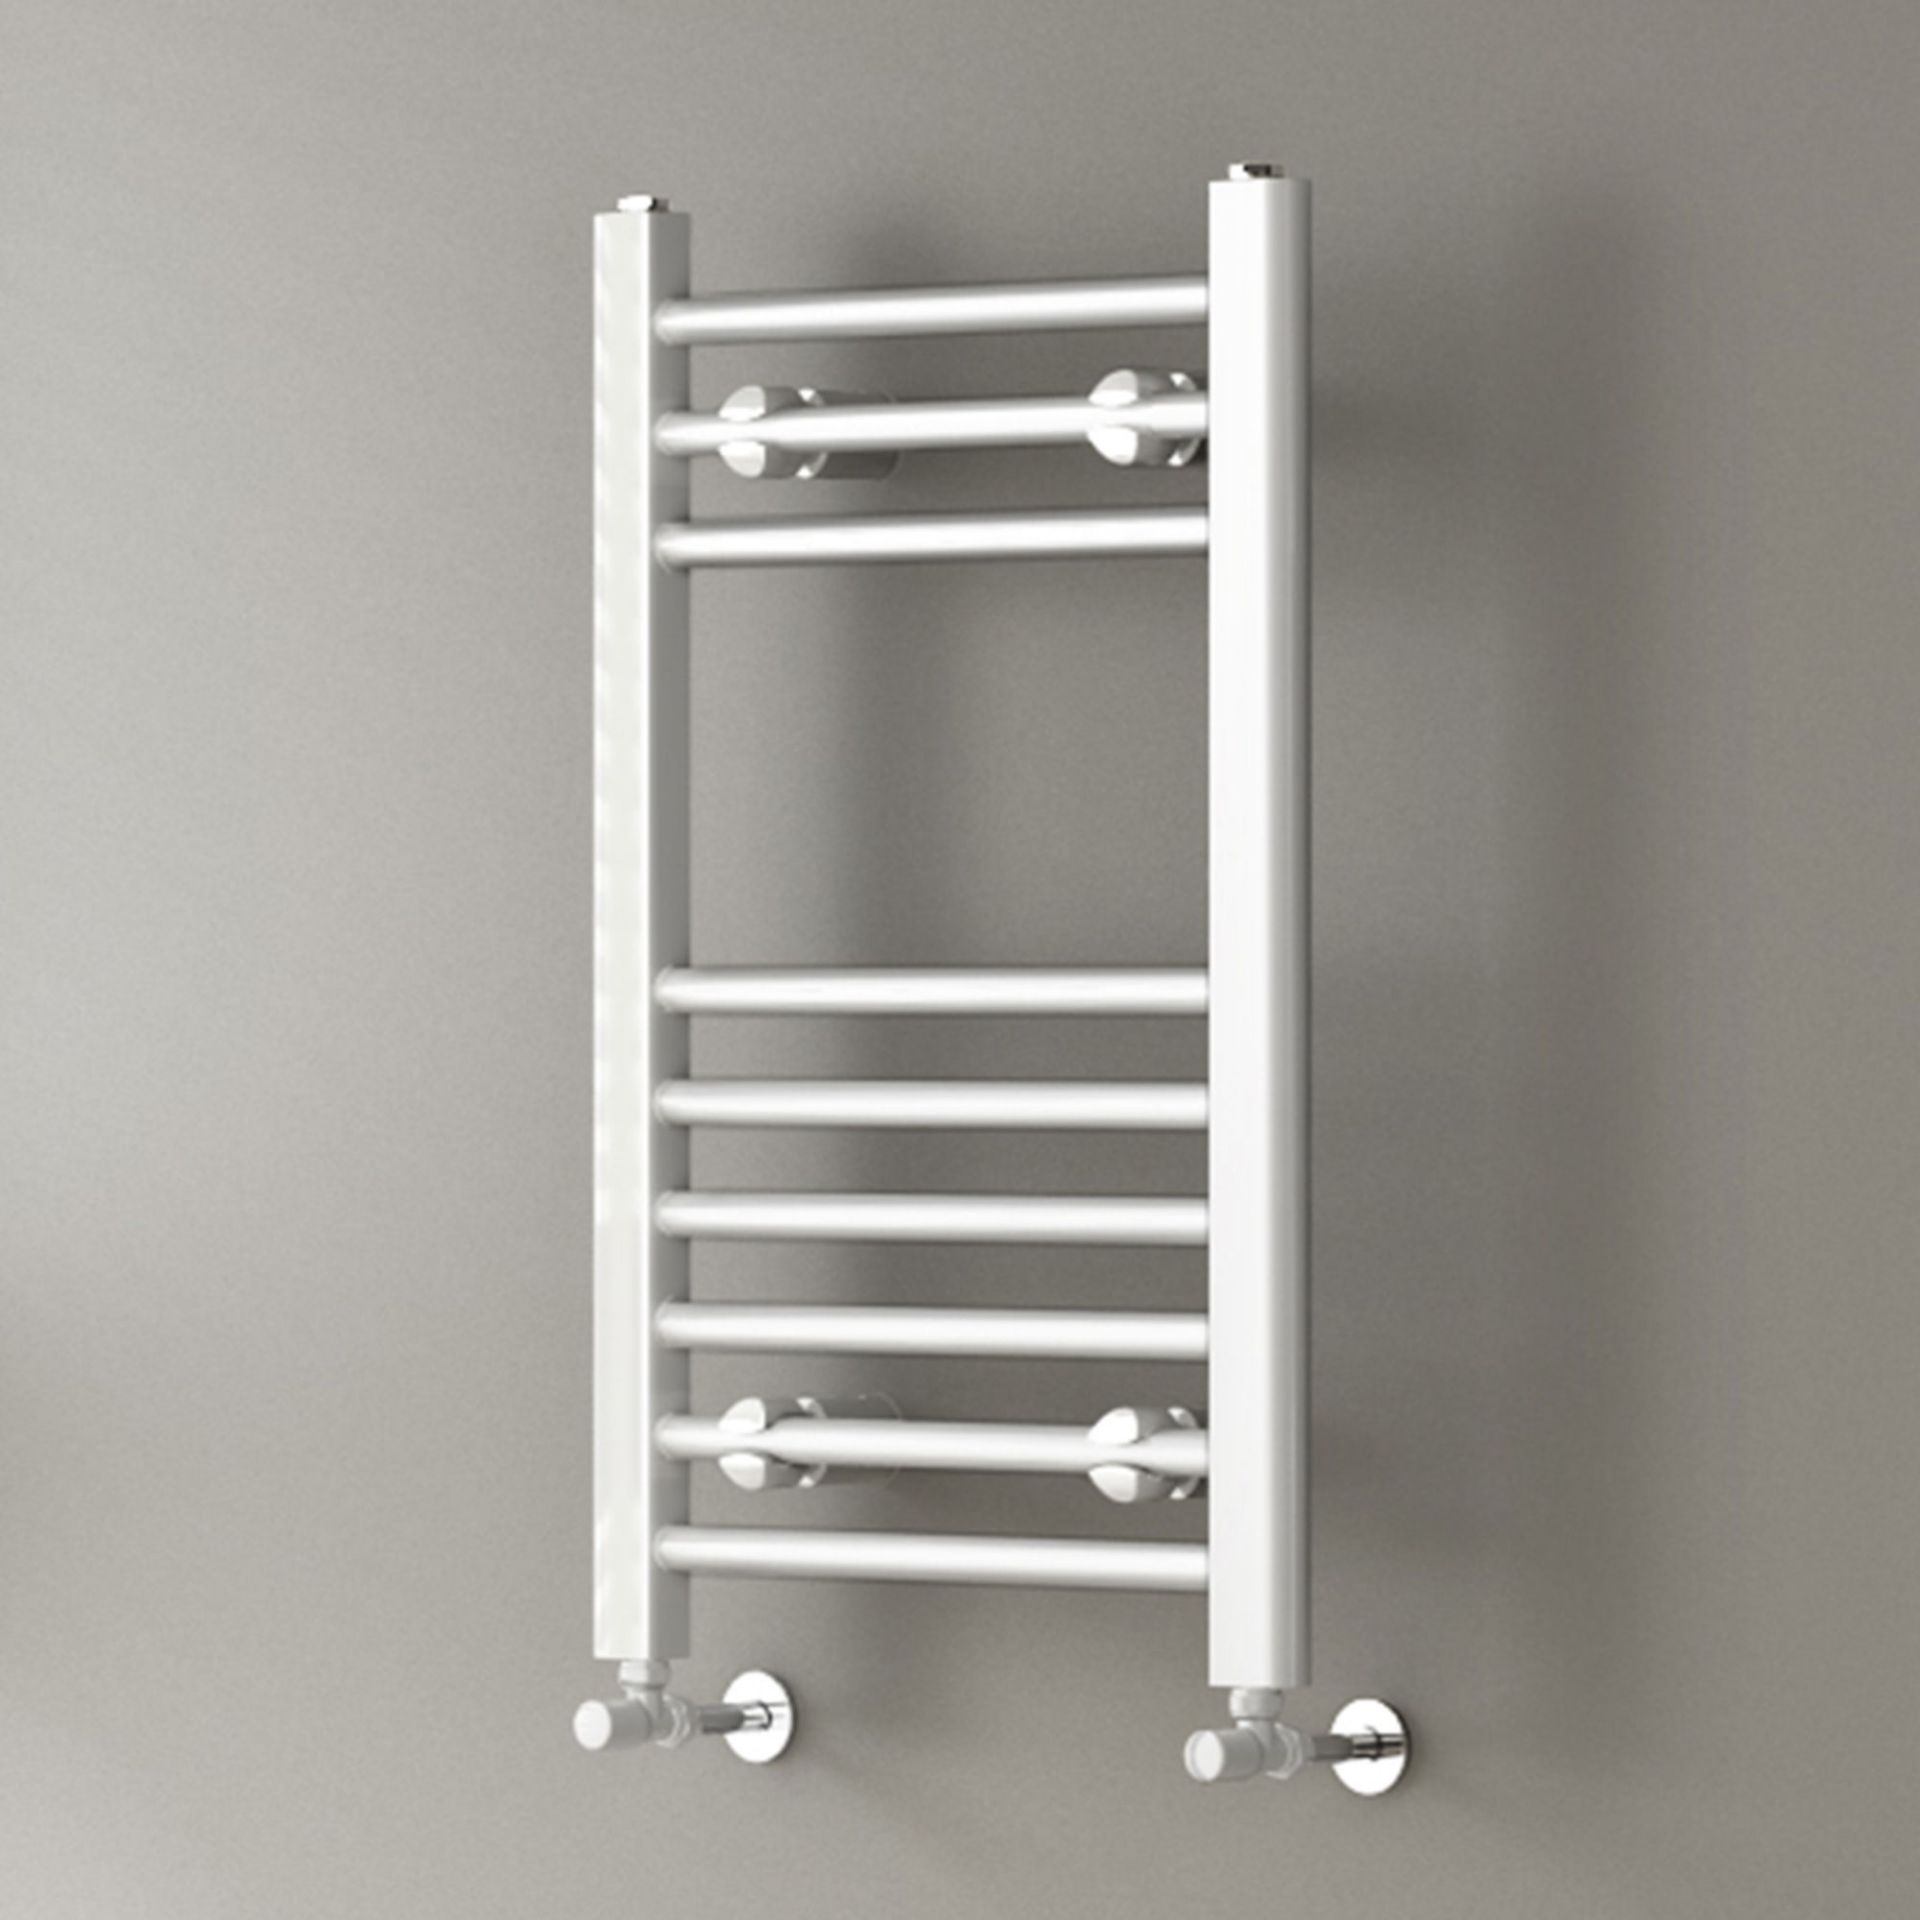 (ED113) 650x400mm White Straight Rail Ladder Towel Radiator. Made from low carbon steel Finished